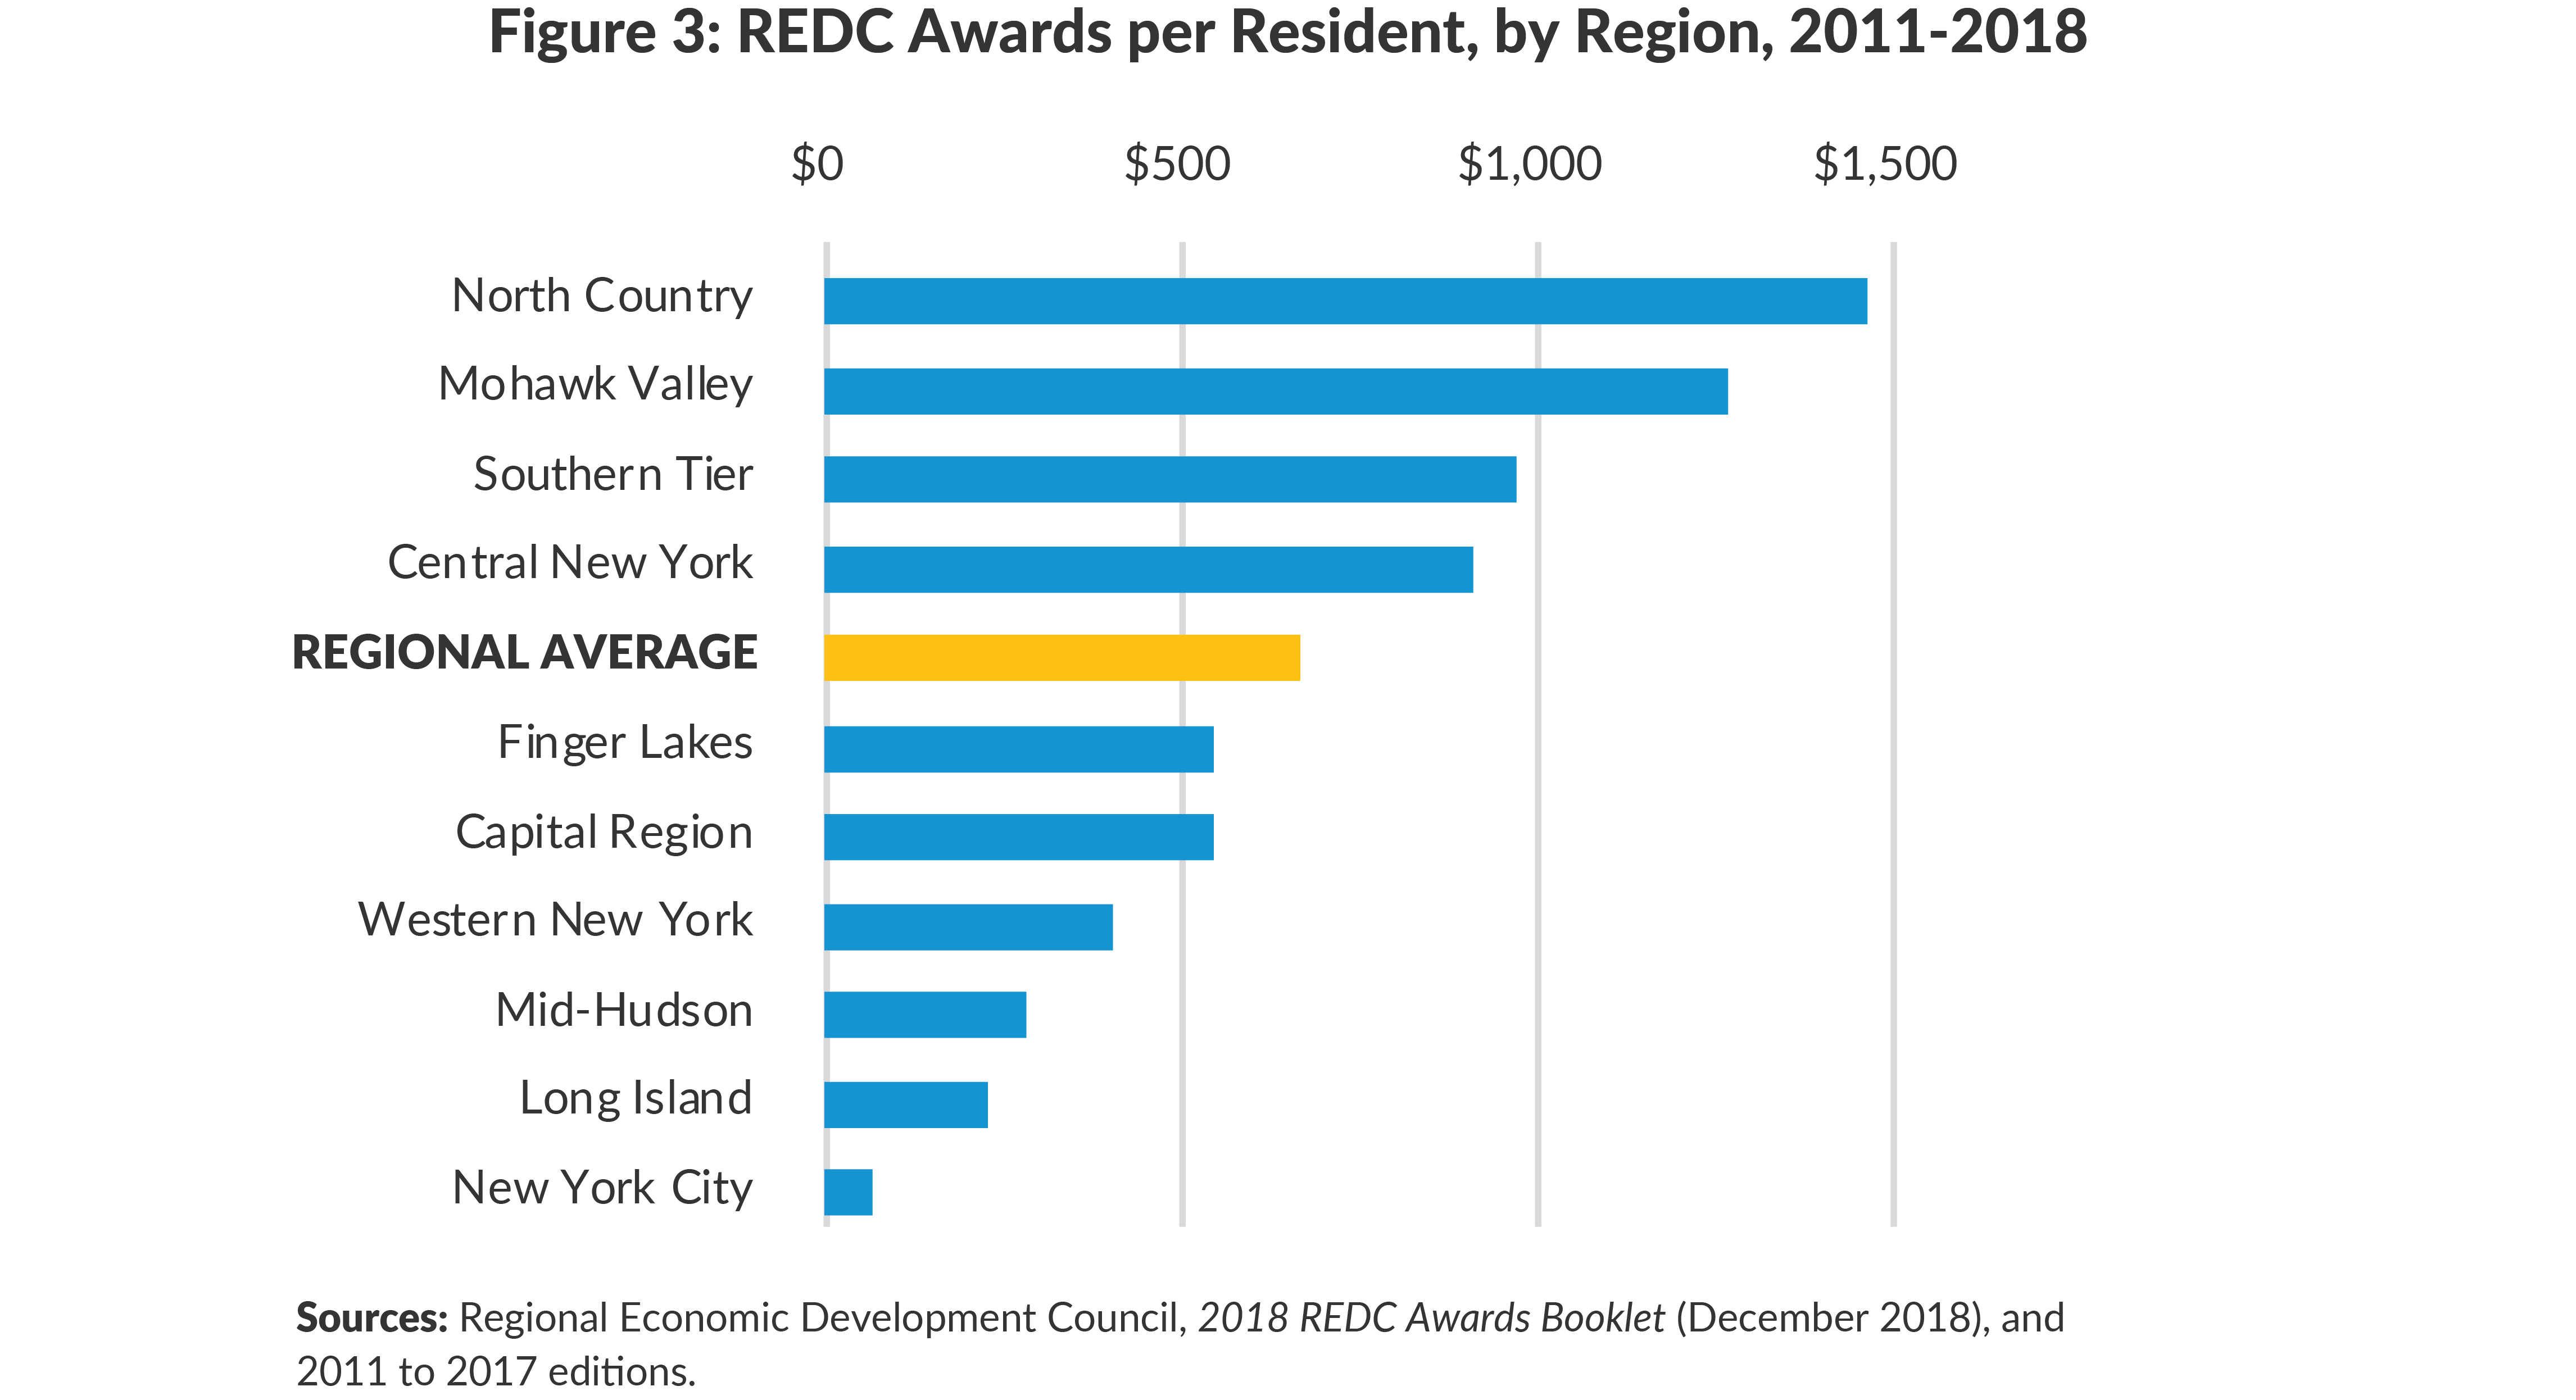 Figure 3: REDC Awards per Resident, by Region, 2011-2018